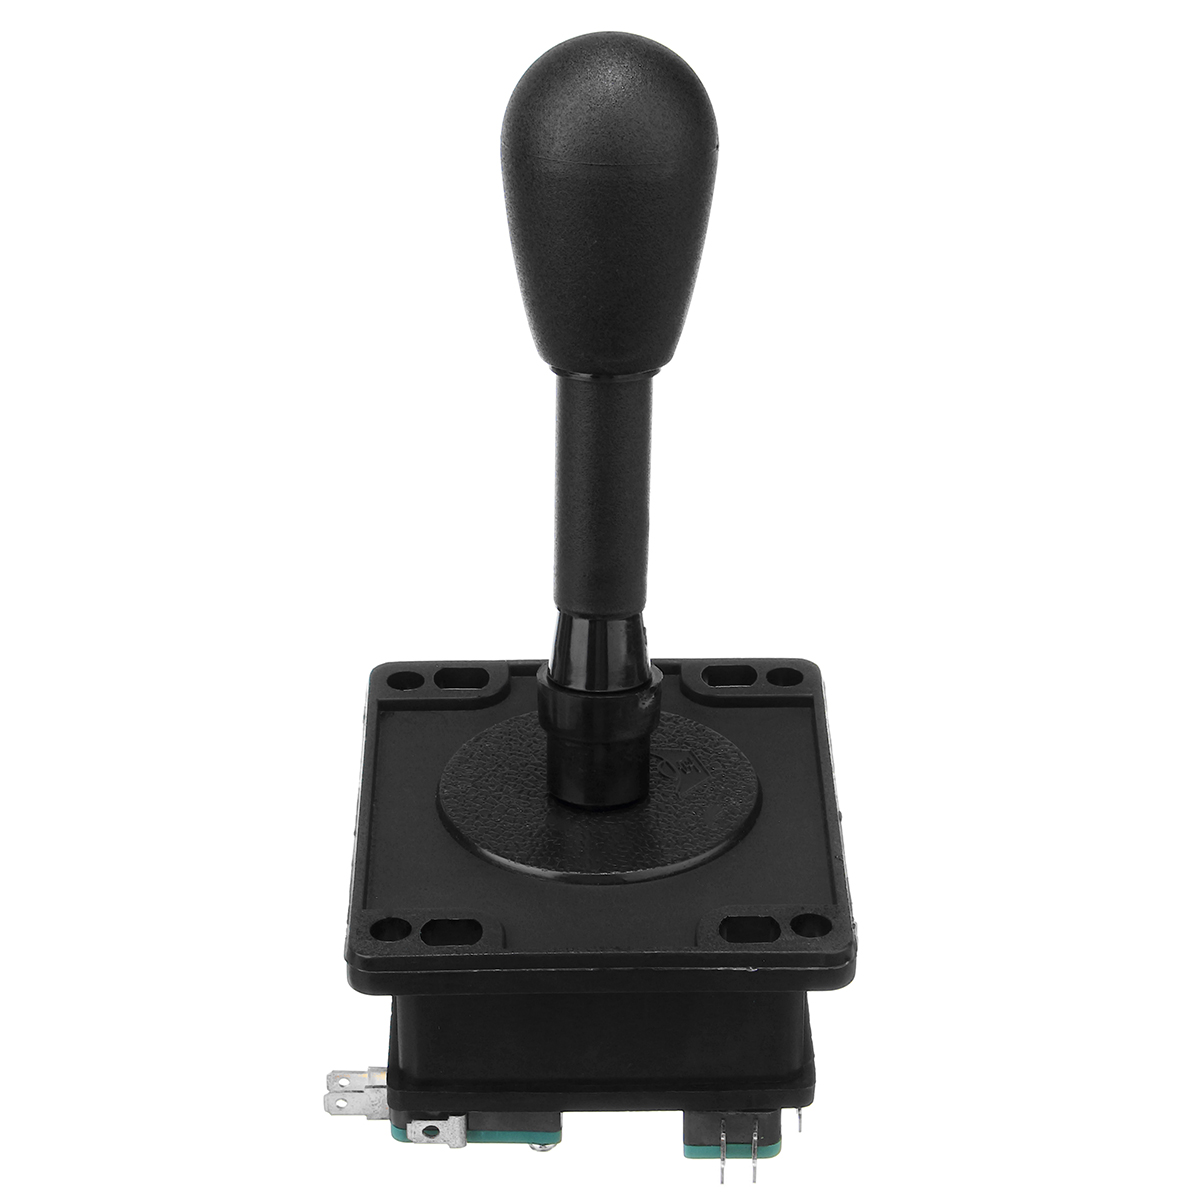 8 Way HAPP NEO GEO Competition Joystick for Arcade Game Console Controller 5